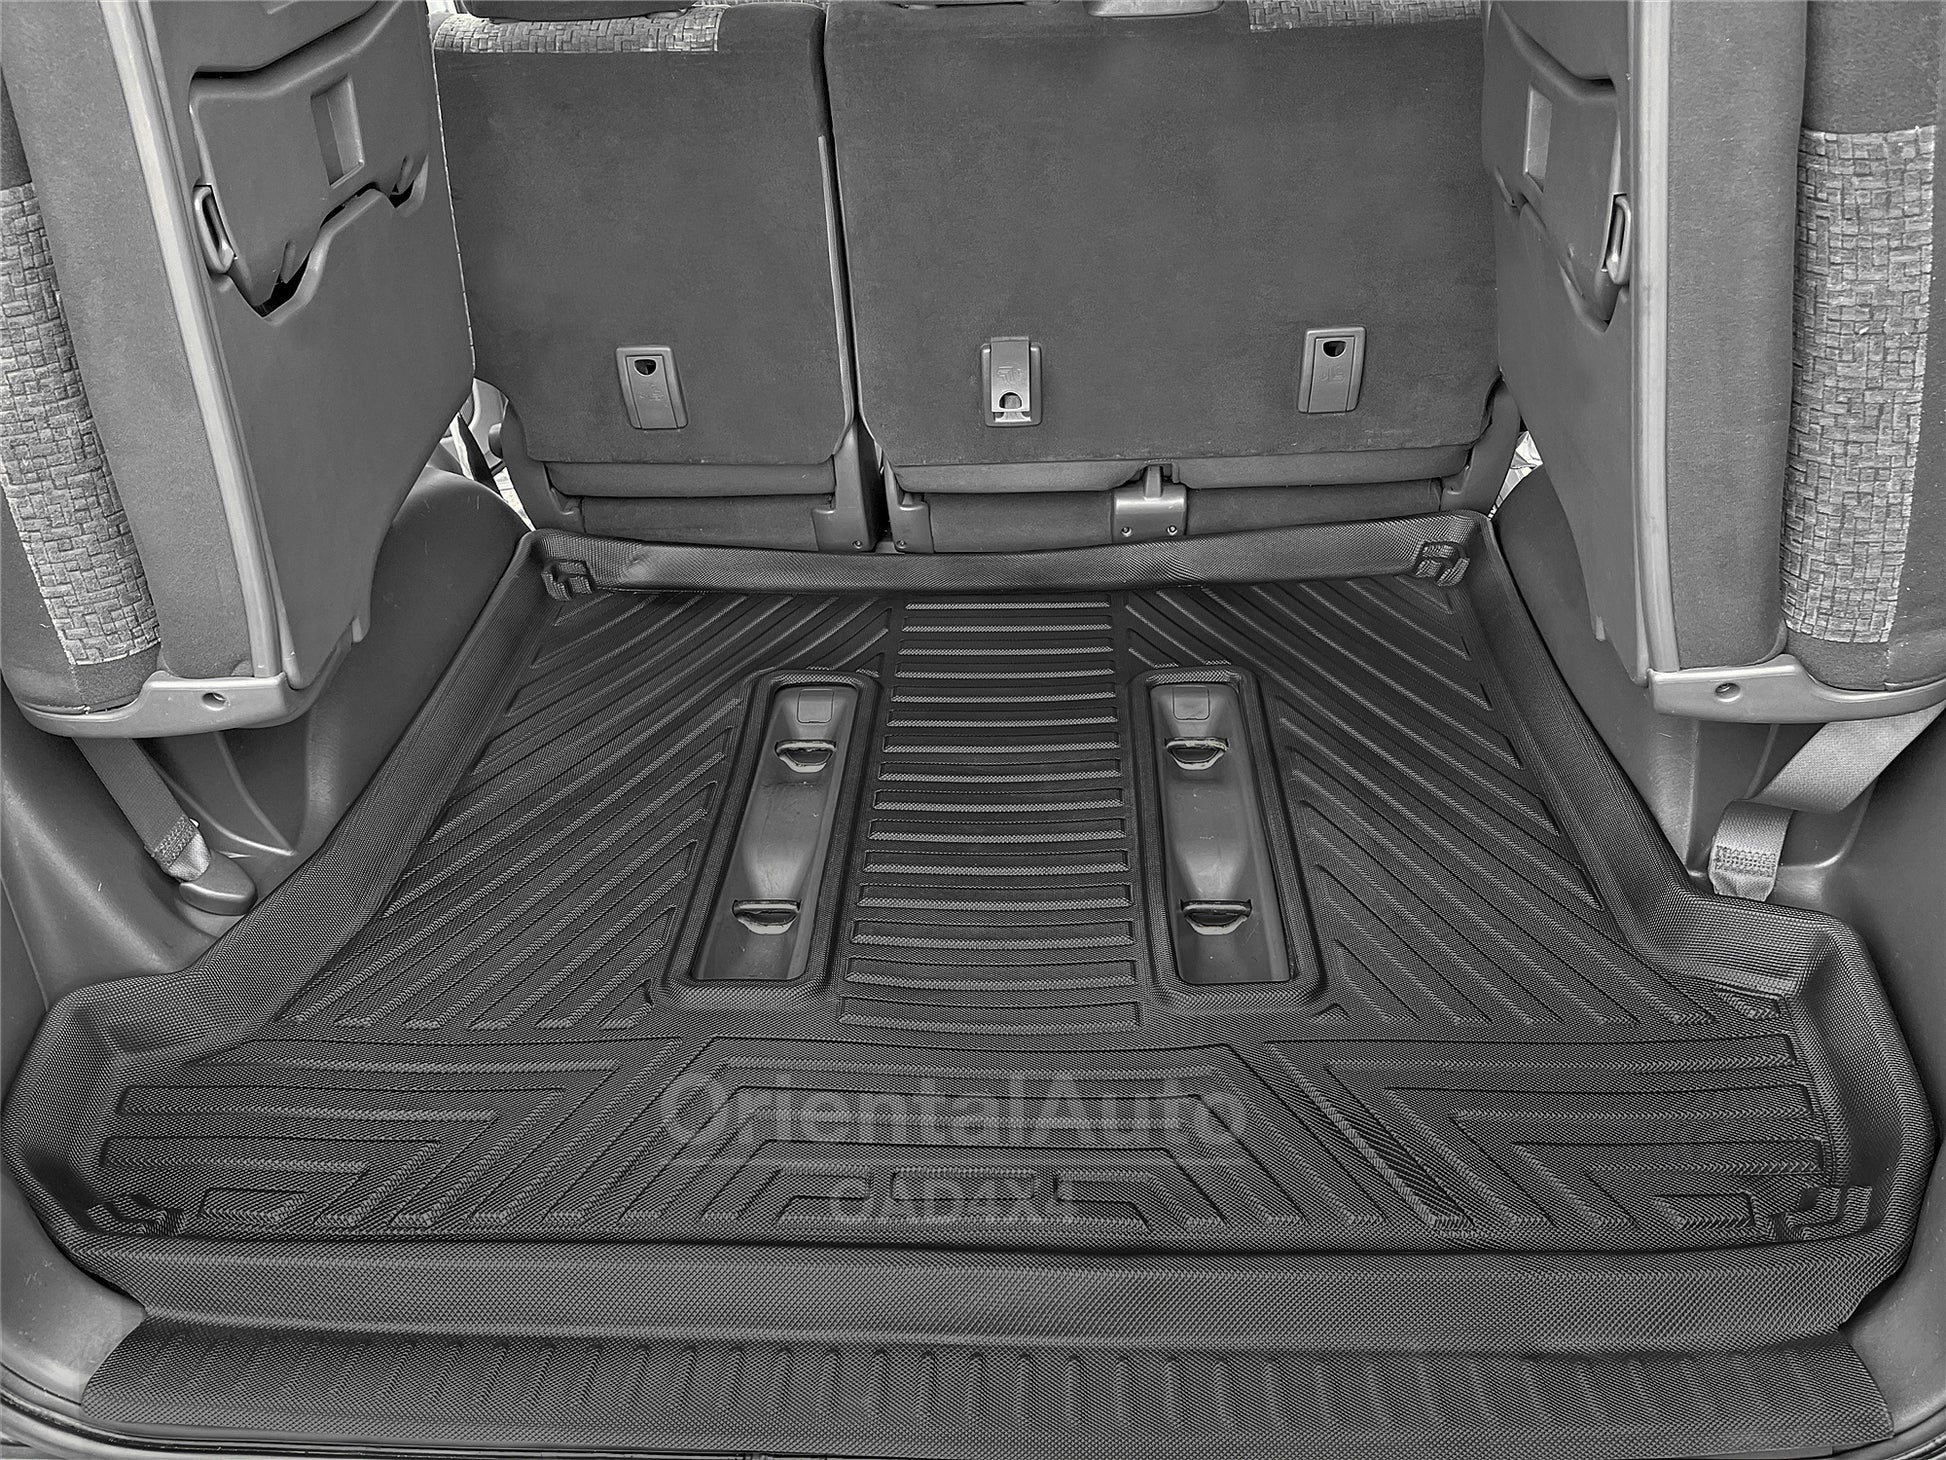 OAD 3D TPE Boot Mat for Toyota Prado 120 2003-2009 with Inner Rear